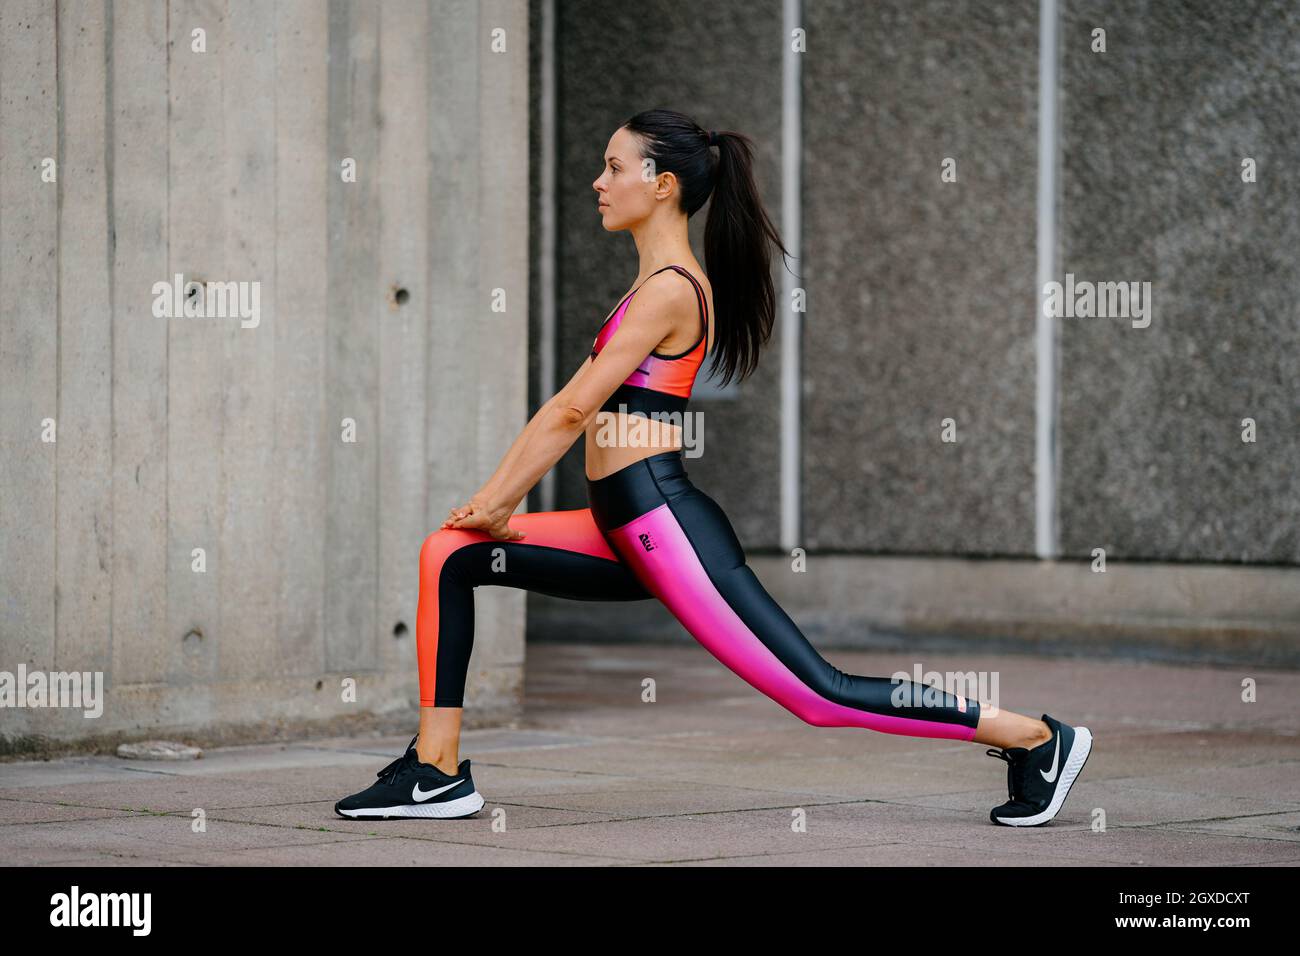 An athletic woman in a pink sports outfit stretching before a workout in an urban environment Stock Photo